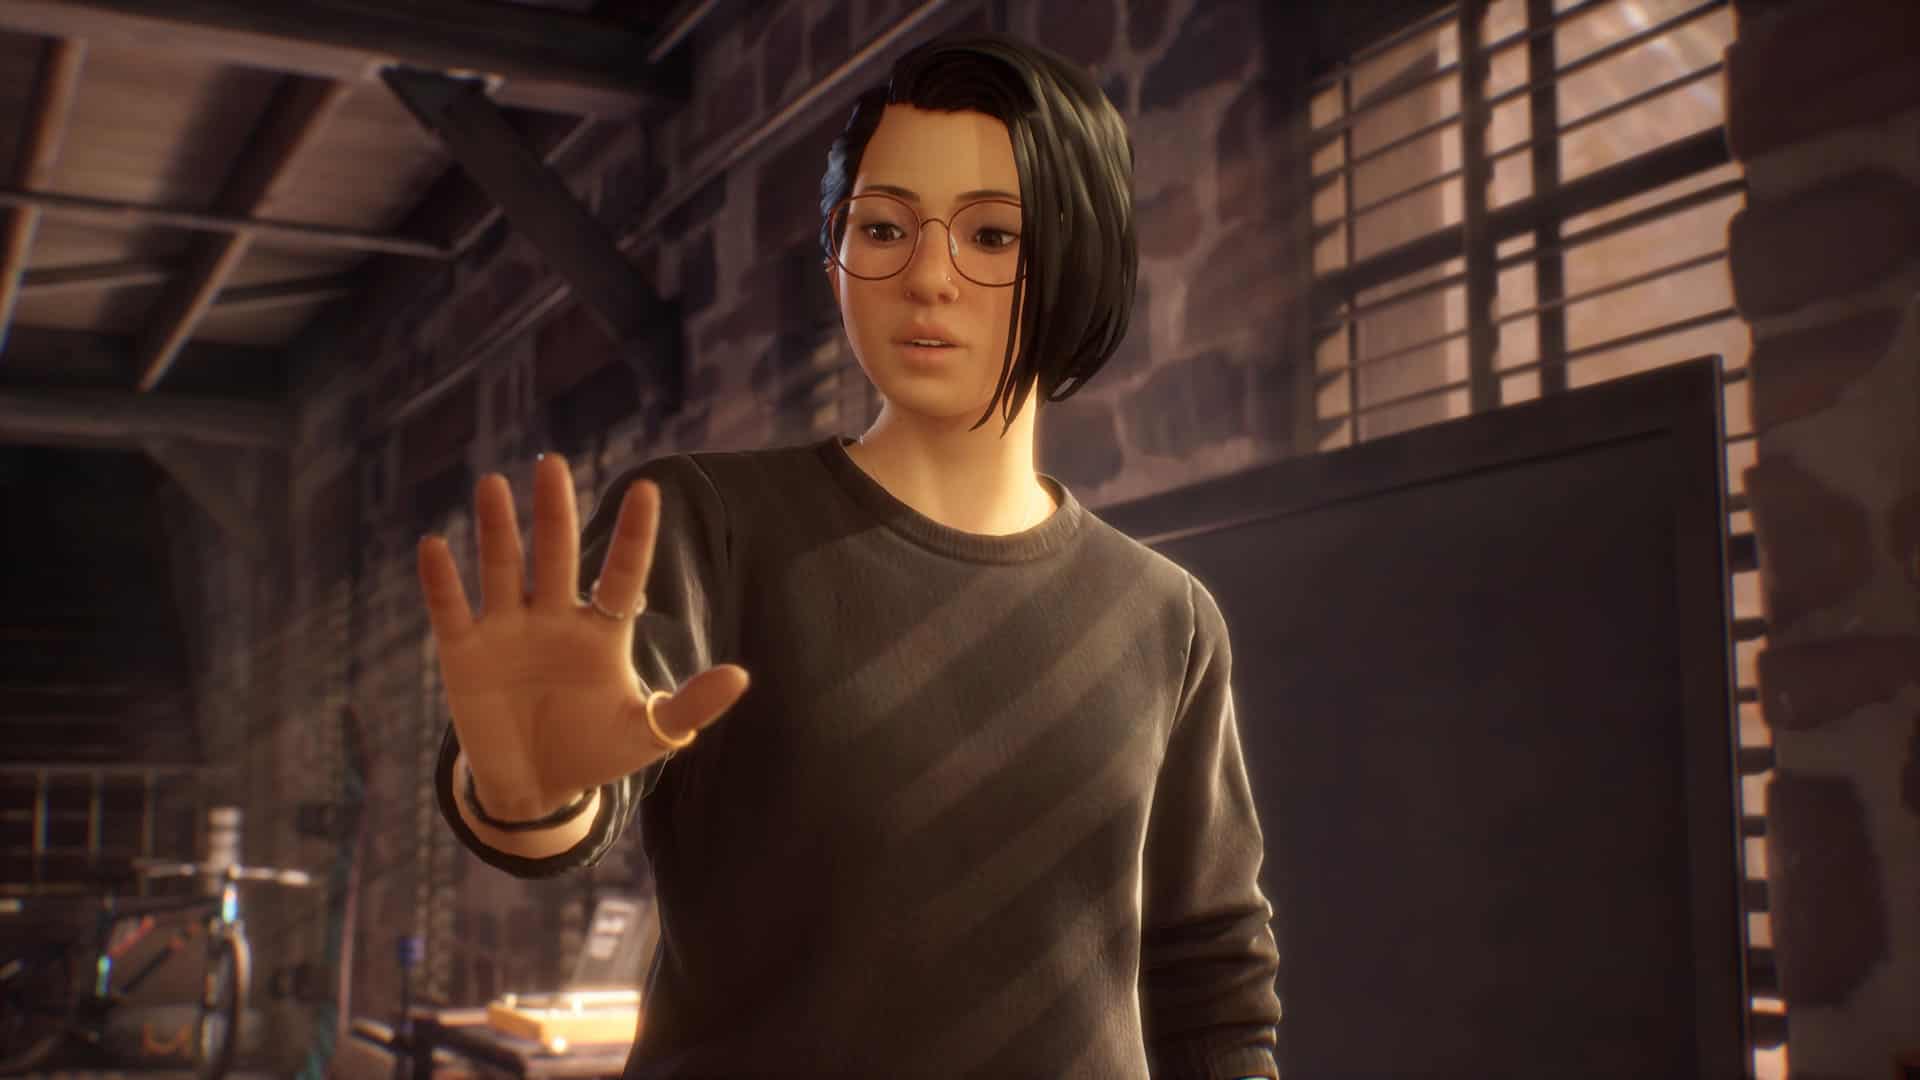 Life is Strange: True Colors offers up first gameplay in new footage